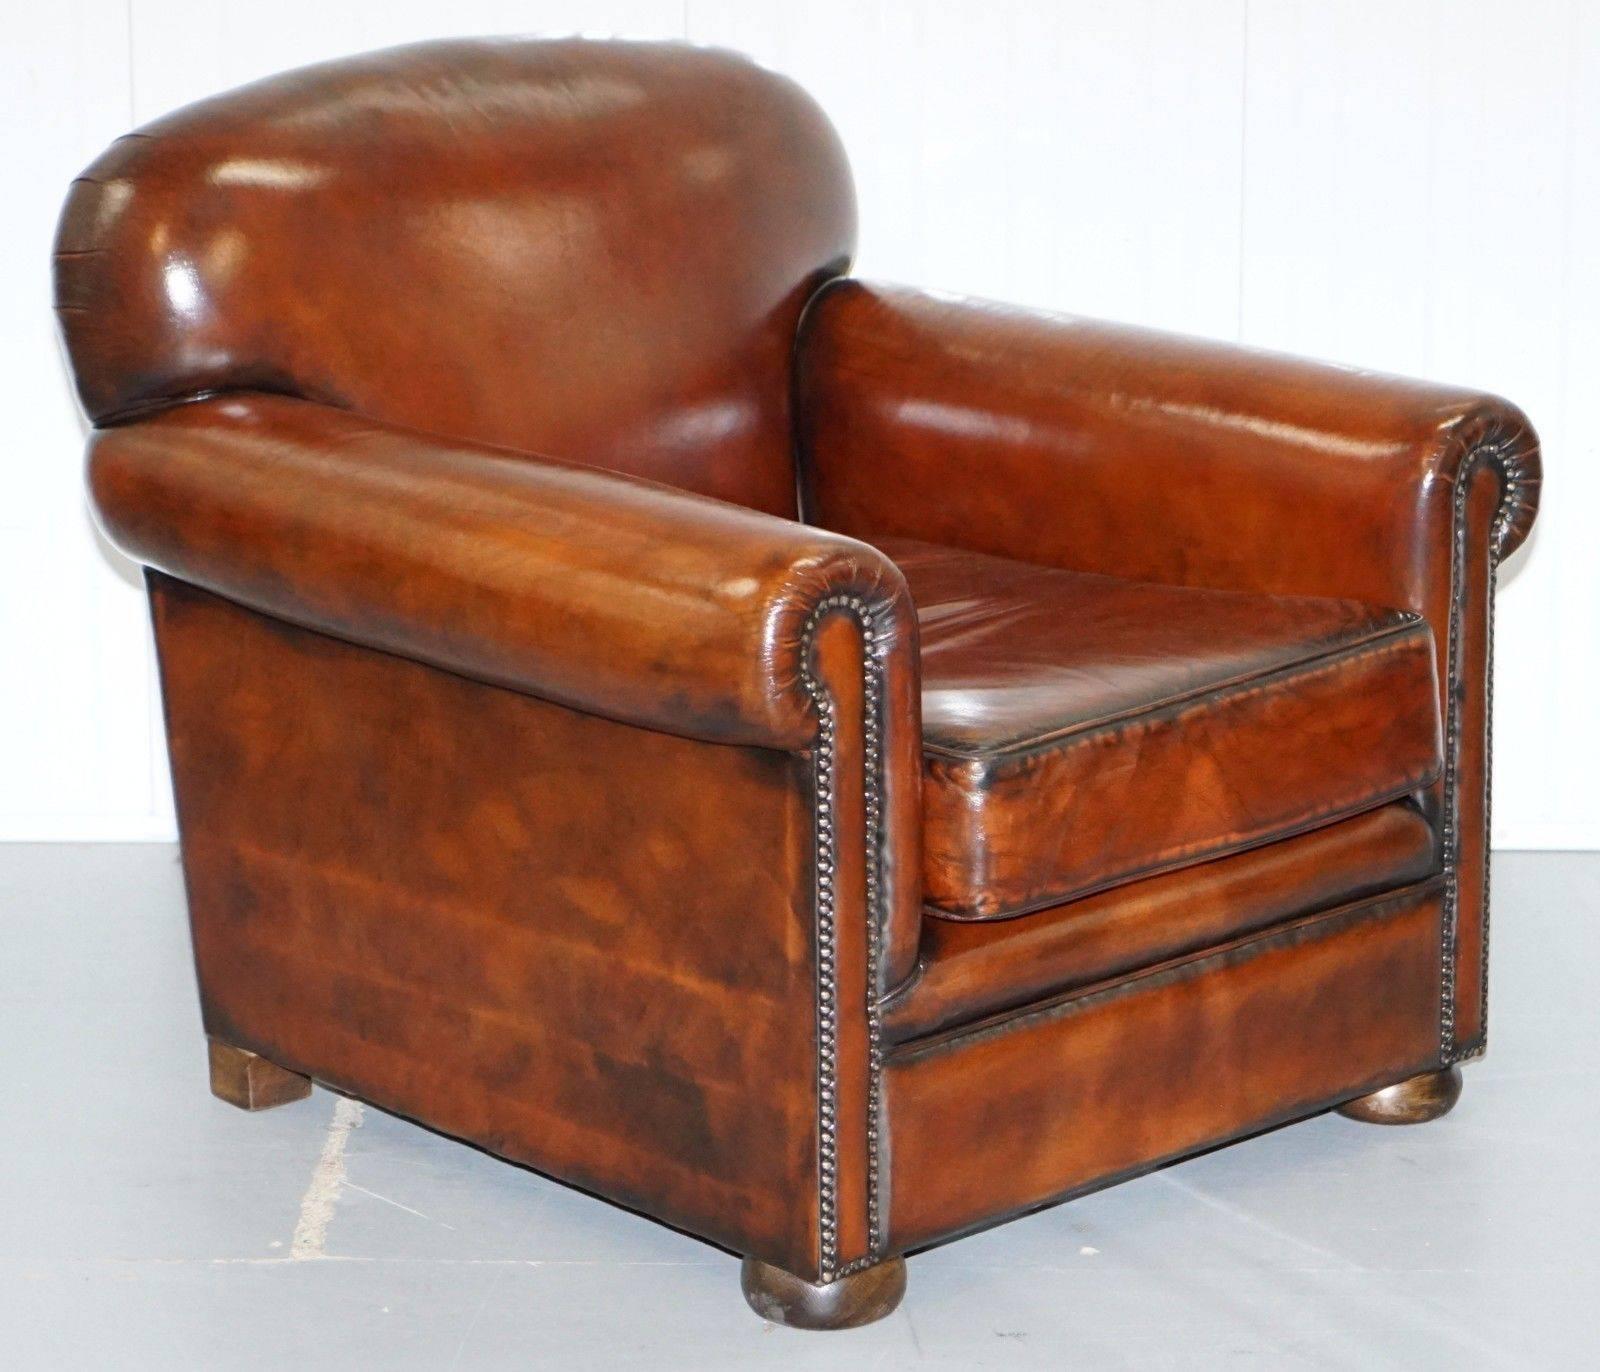 Wimbledon-Furniture is delighted to offer for sale this lovely pair of fully restored hand dyed aged brown leather gentleman’s club armchairs

A very good looking well-made pair in fully restored condition, we’ve had these hand dyed this lovely